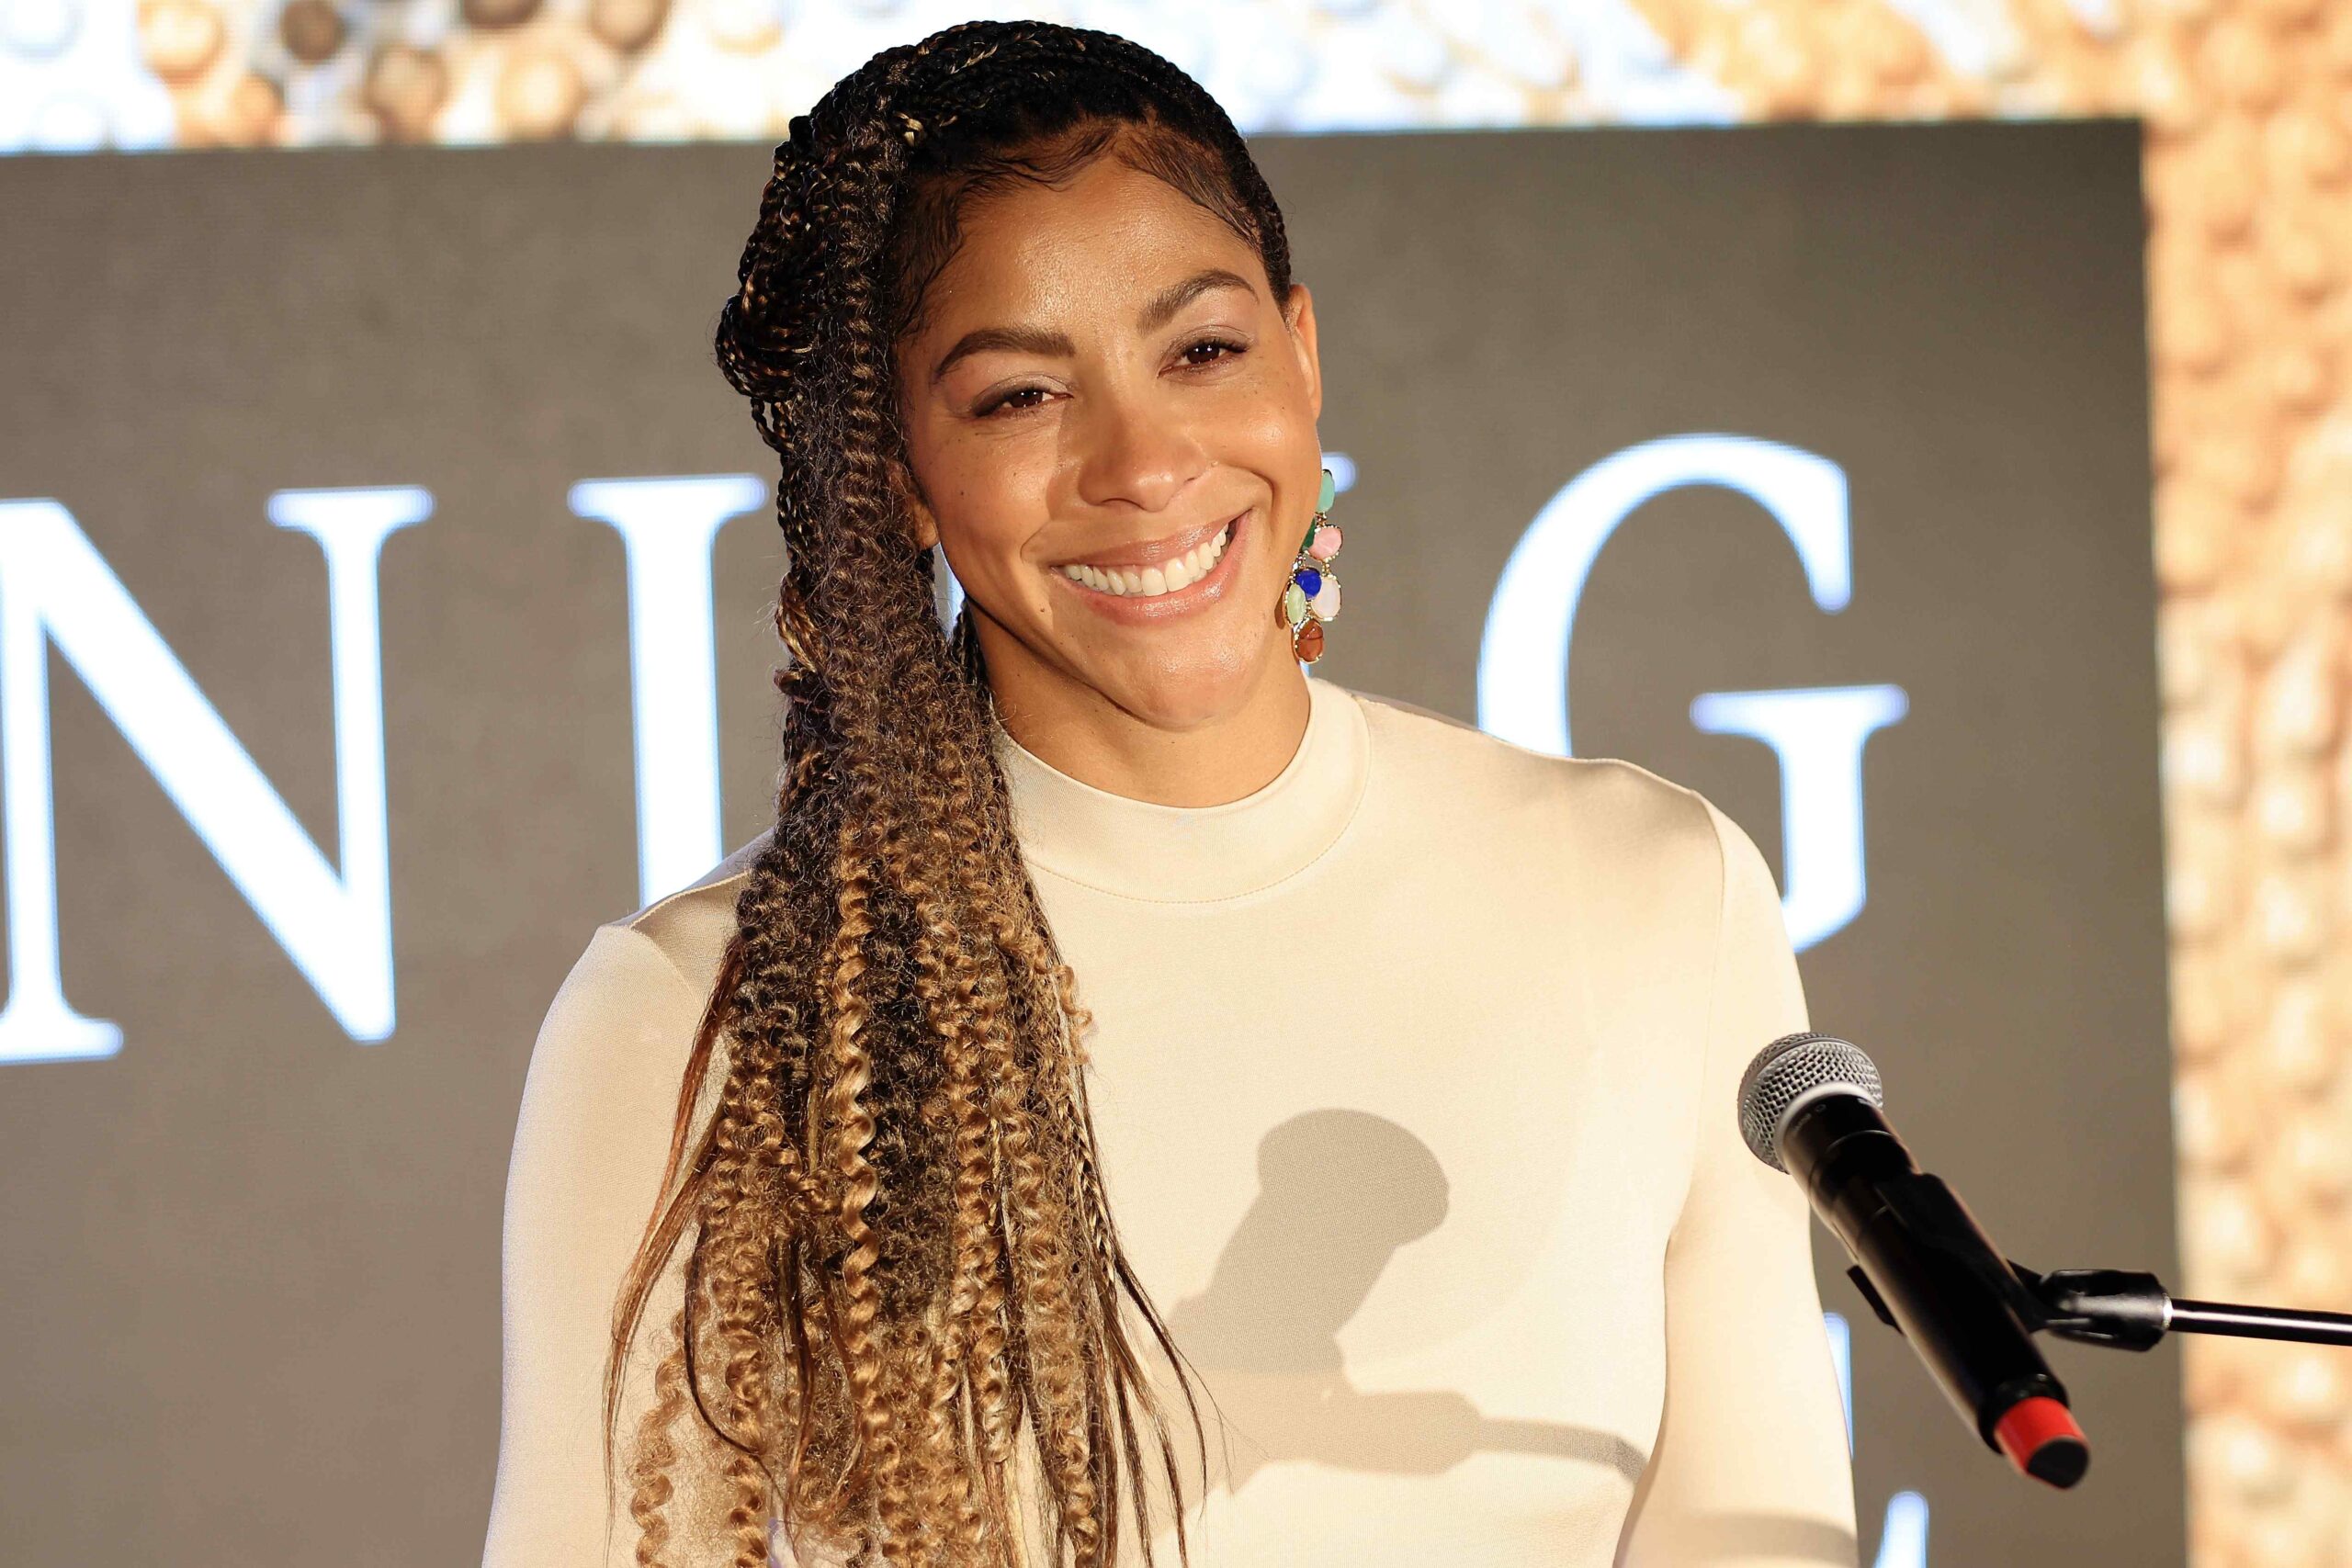 Adidas Celebrates WNBA Icon Candace Parker And New Chapter As Brand's President Of Women's Basketball